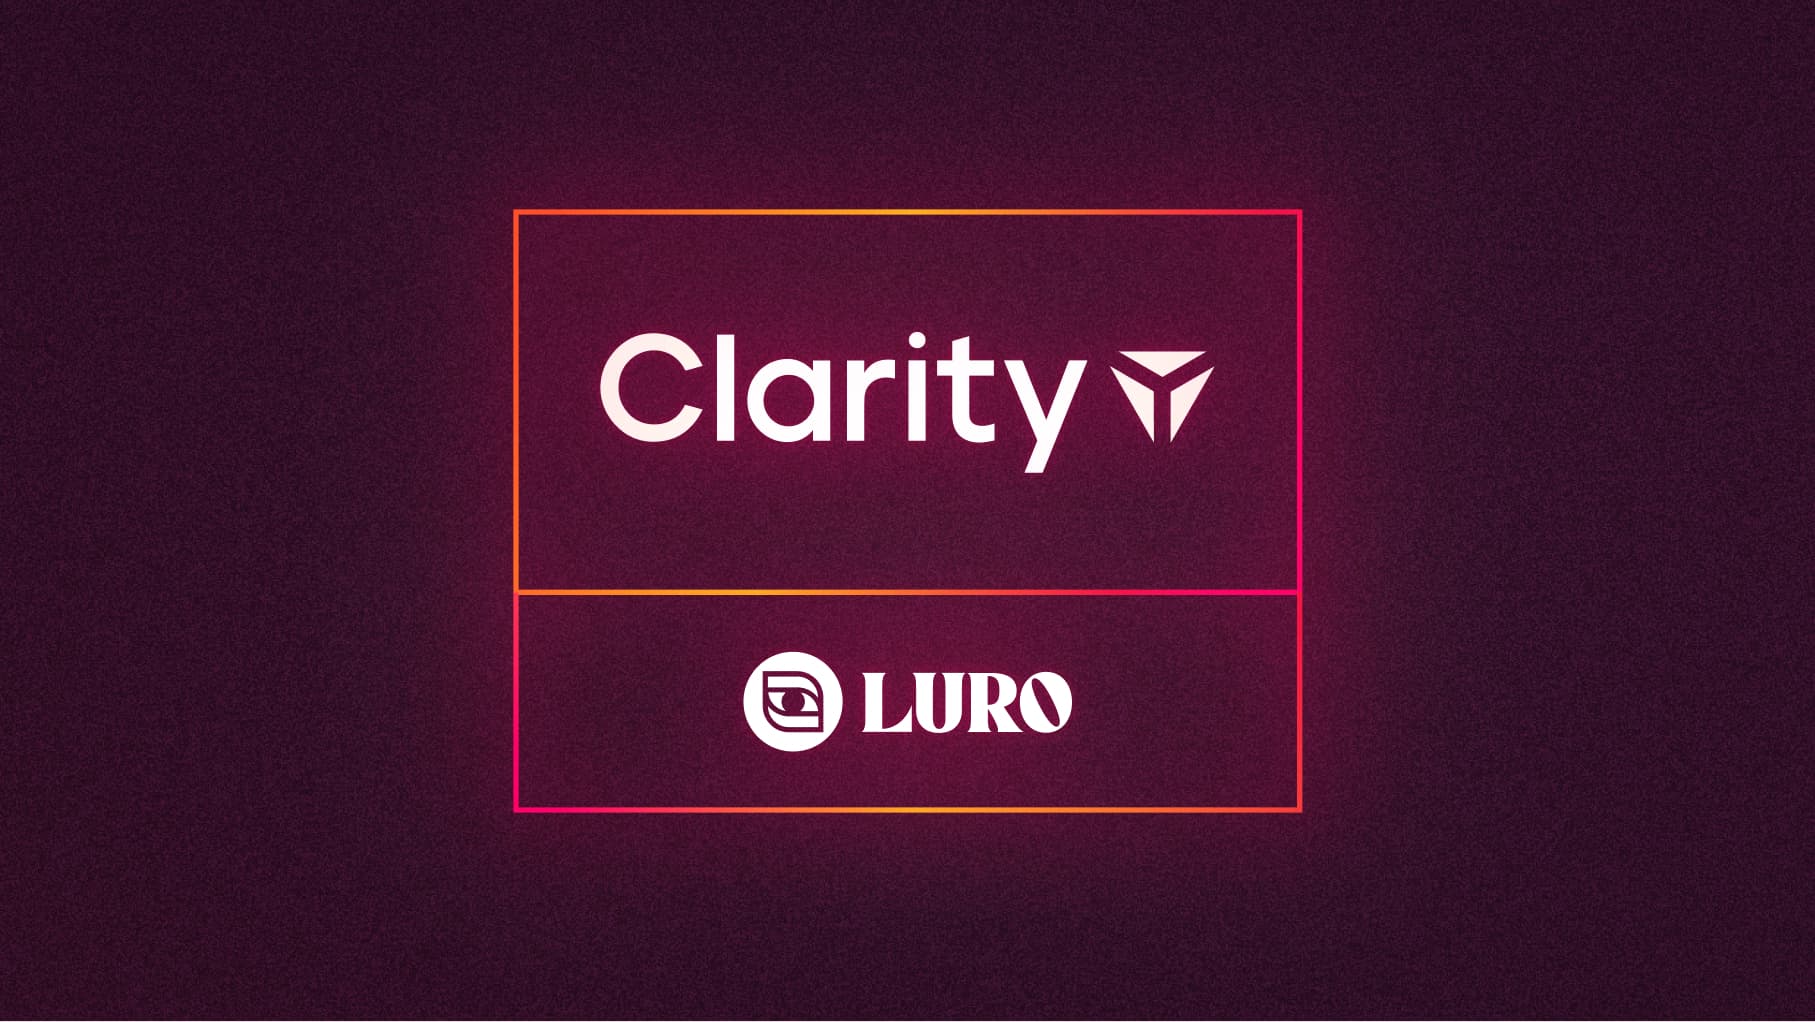 Luro is Proudly Sponsoring Clarity